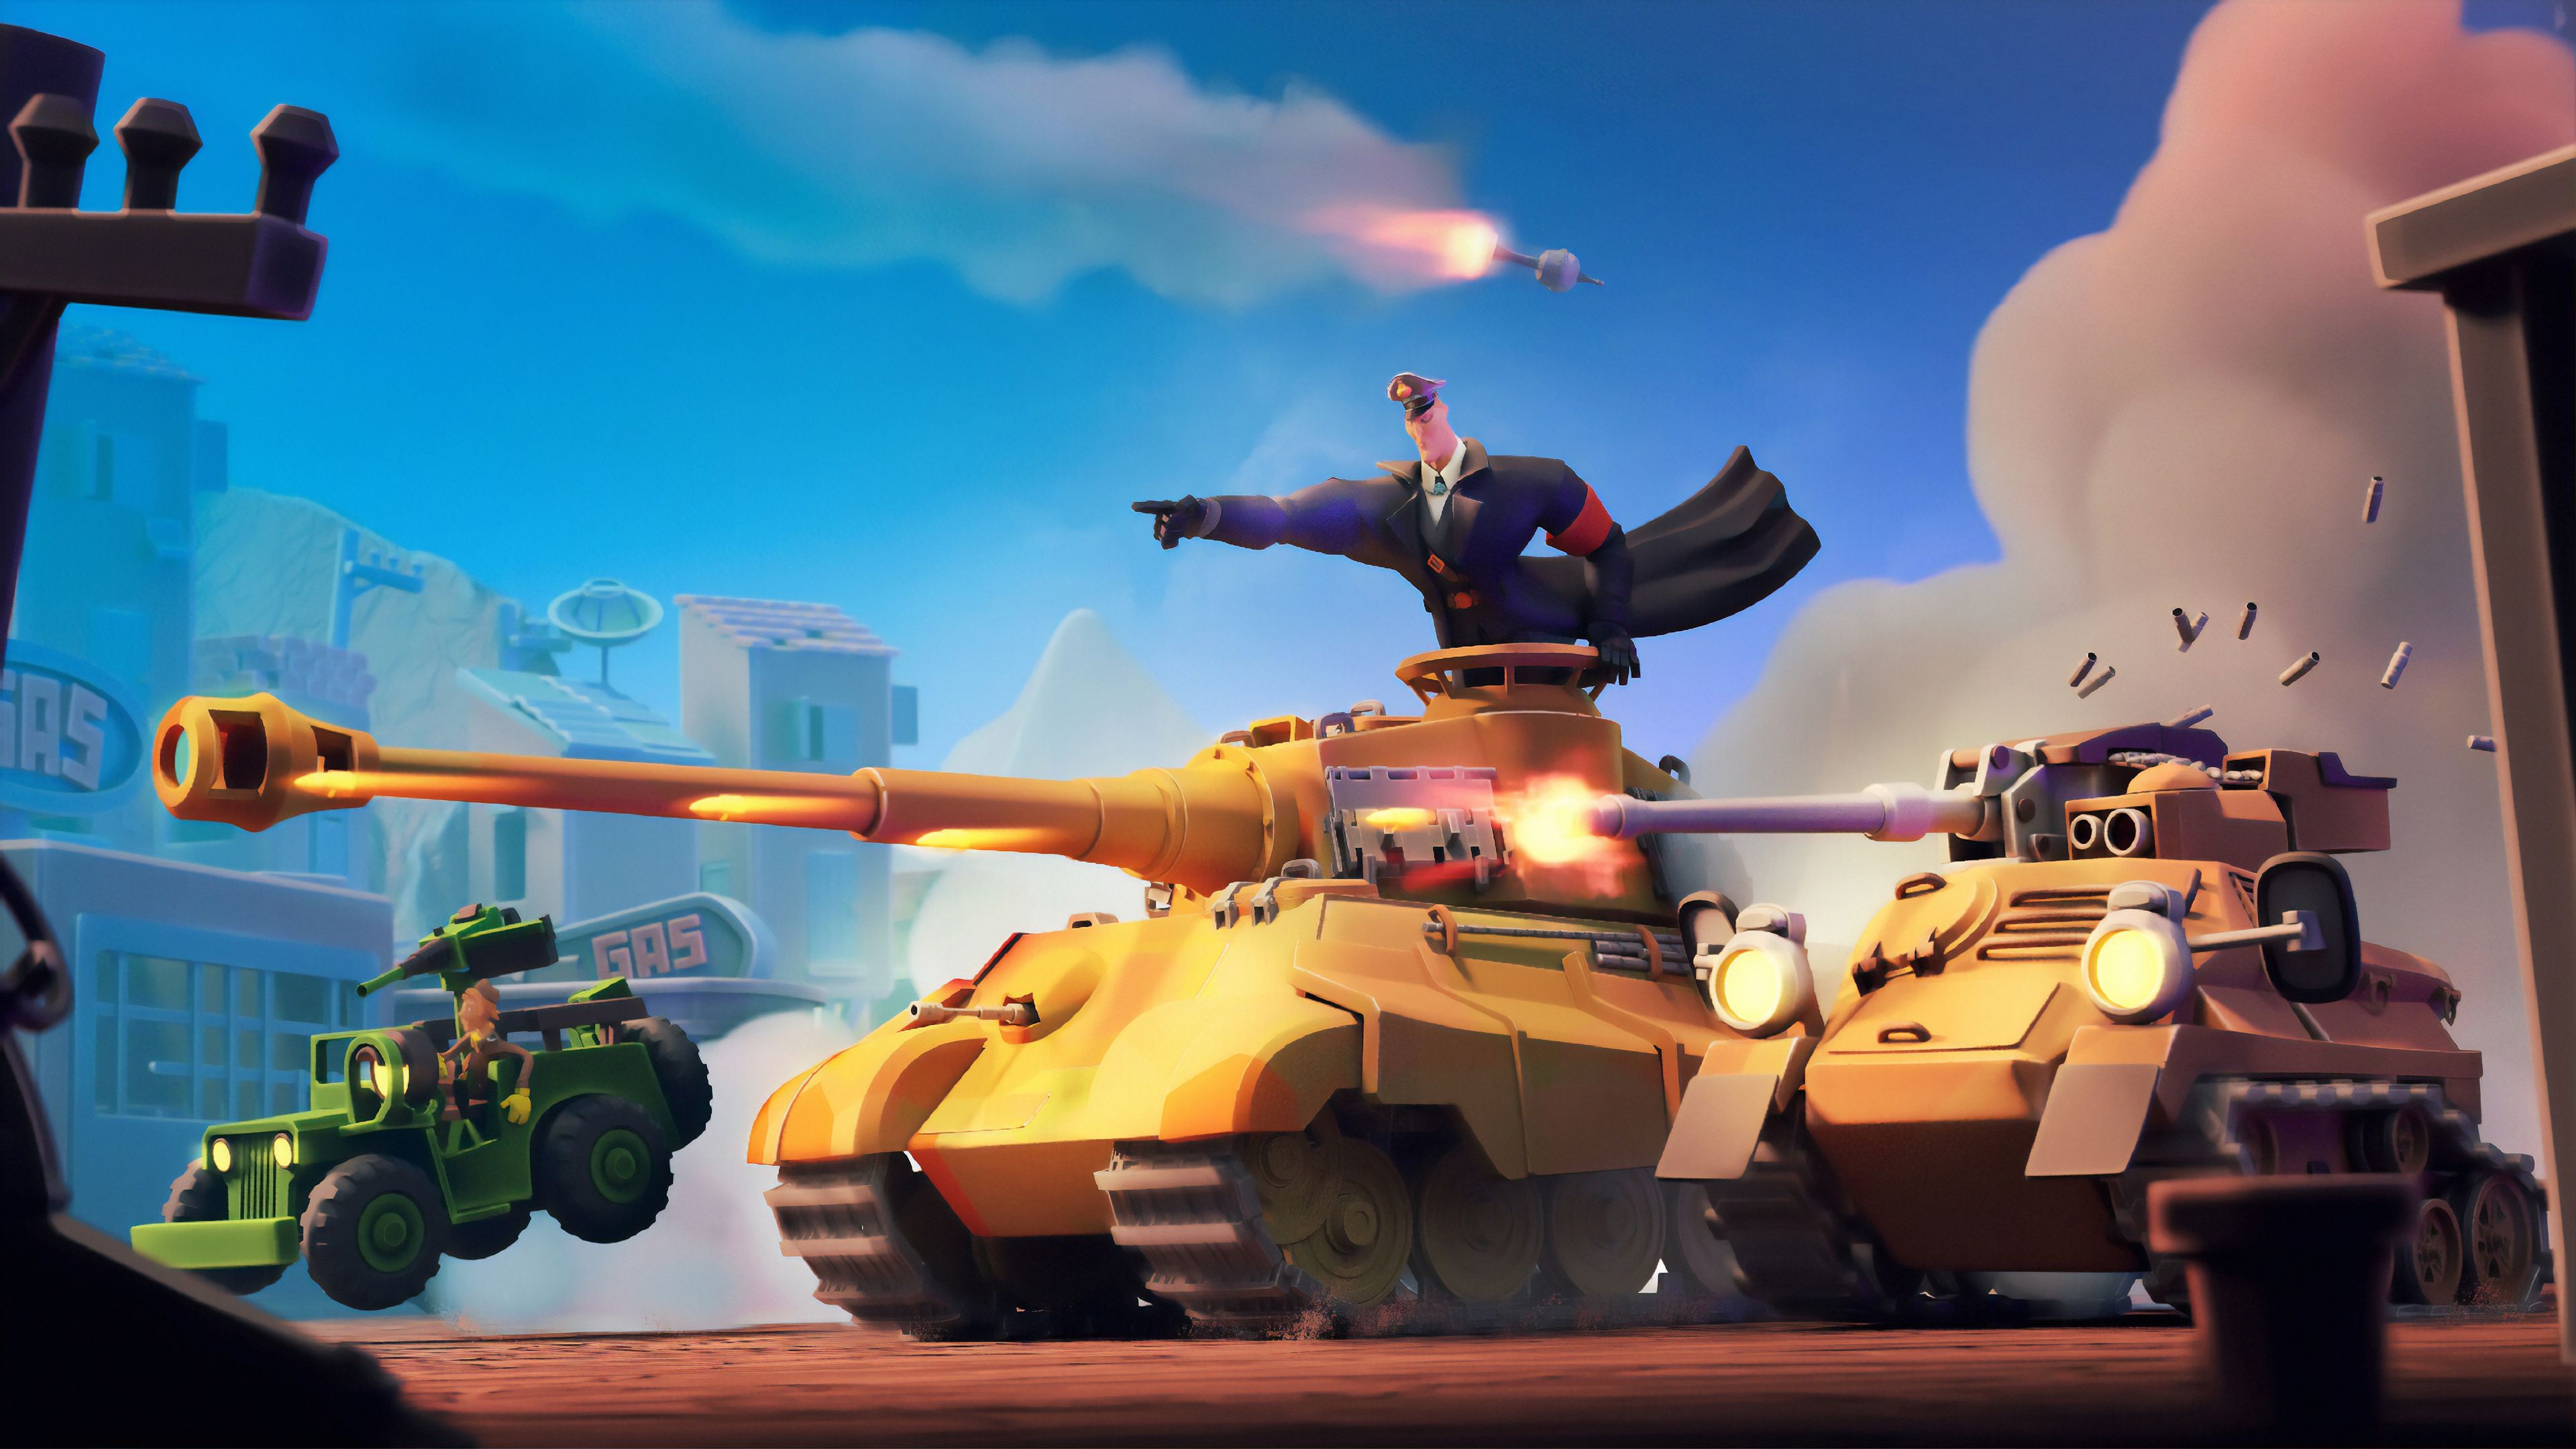 Tankman 4k, HD Artist, 4k Wallpaper, Image, Background, Photo and Picture